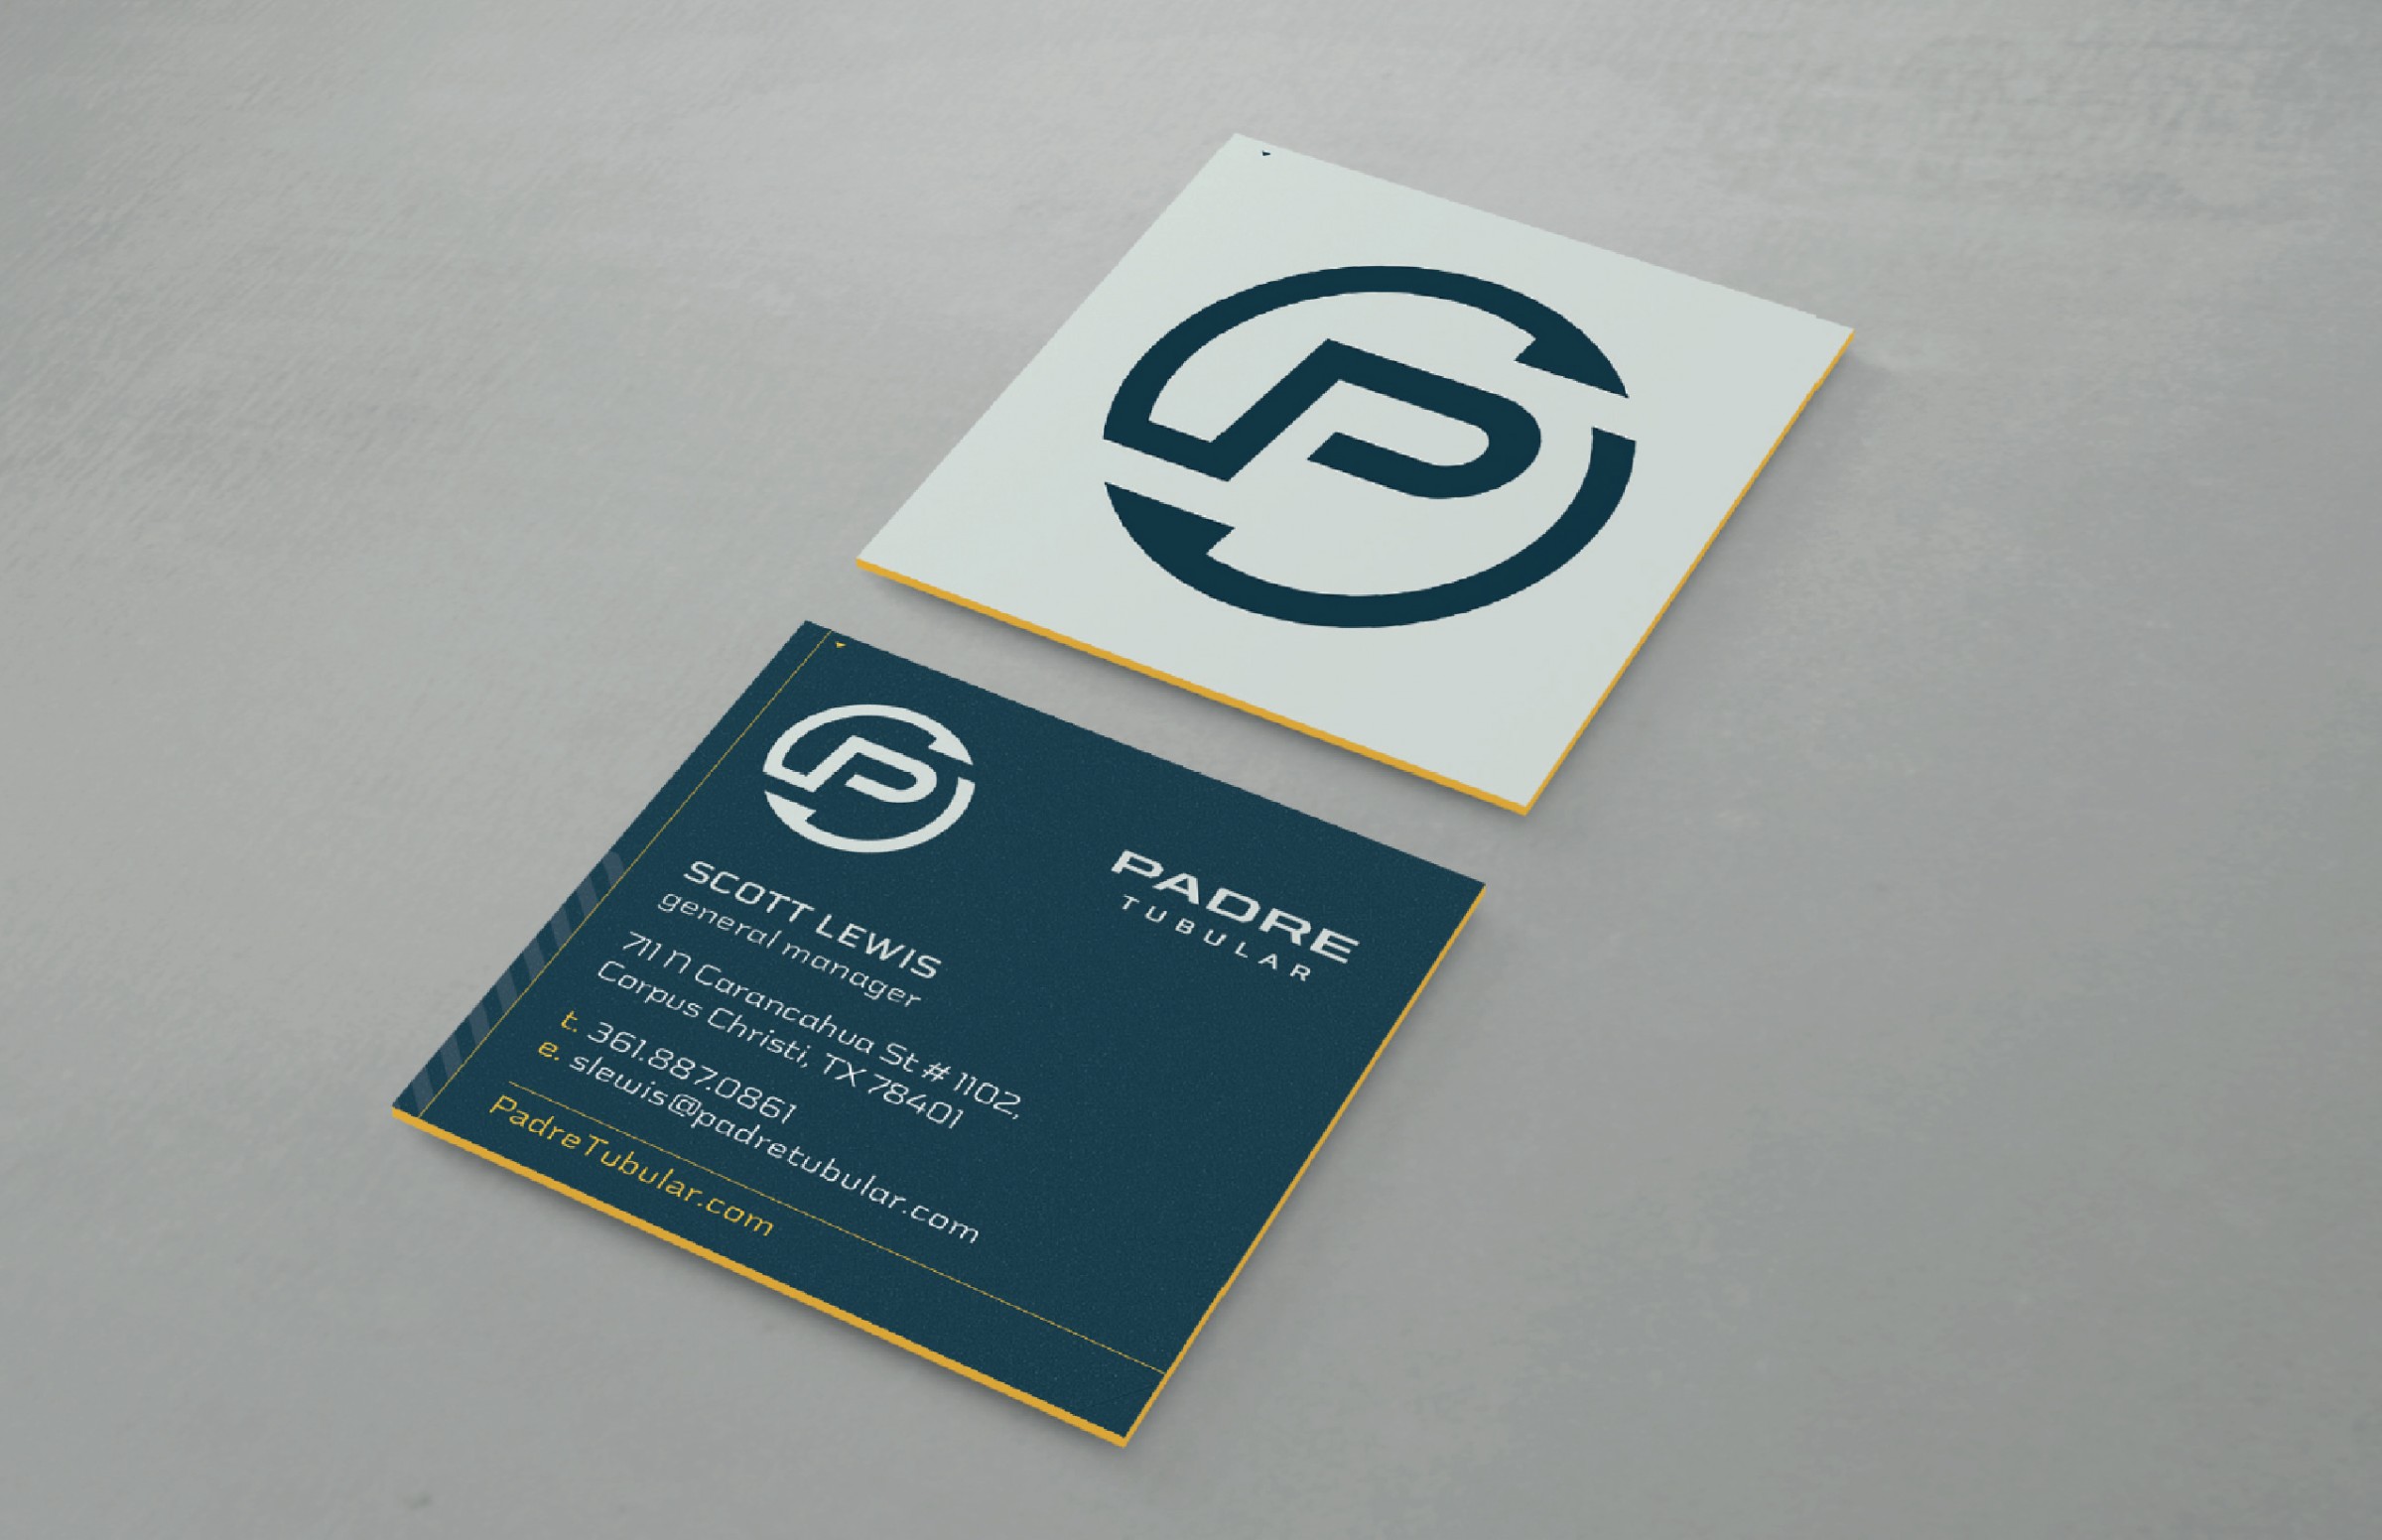 Showing the Padre Tubular business card.